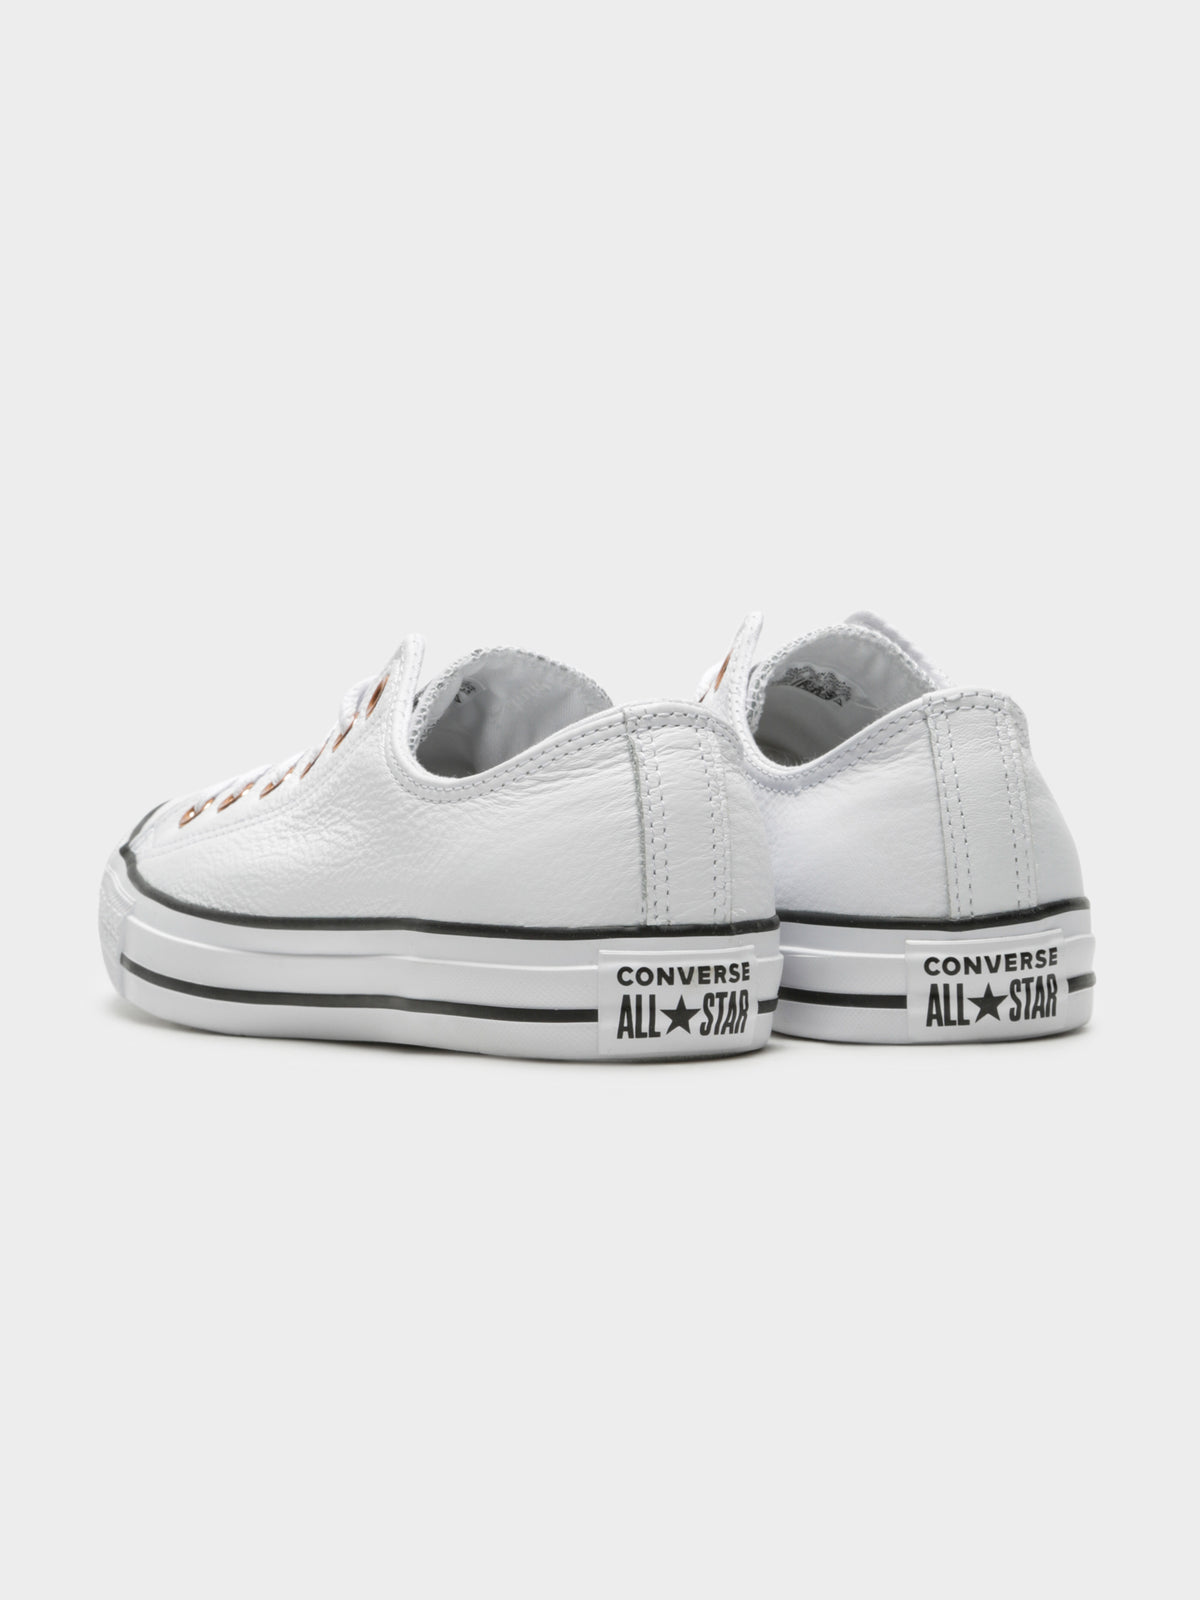 Unisex Chuck Taylor All Star Low-Top Sneakers in White Leather